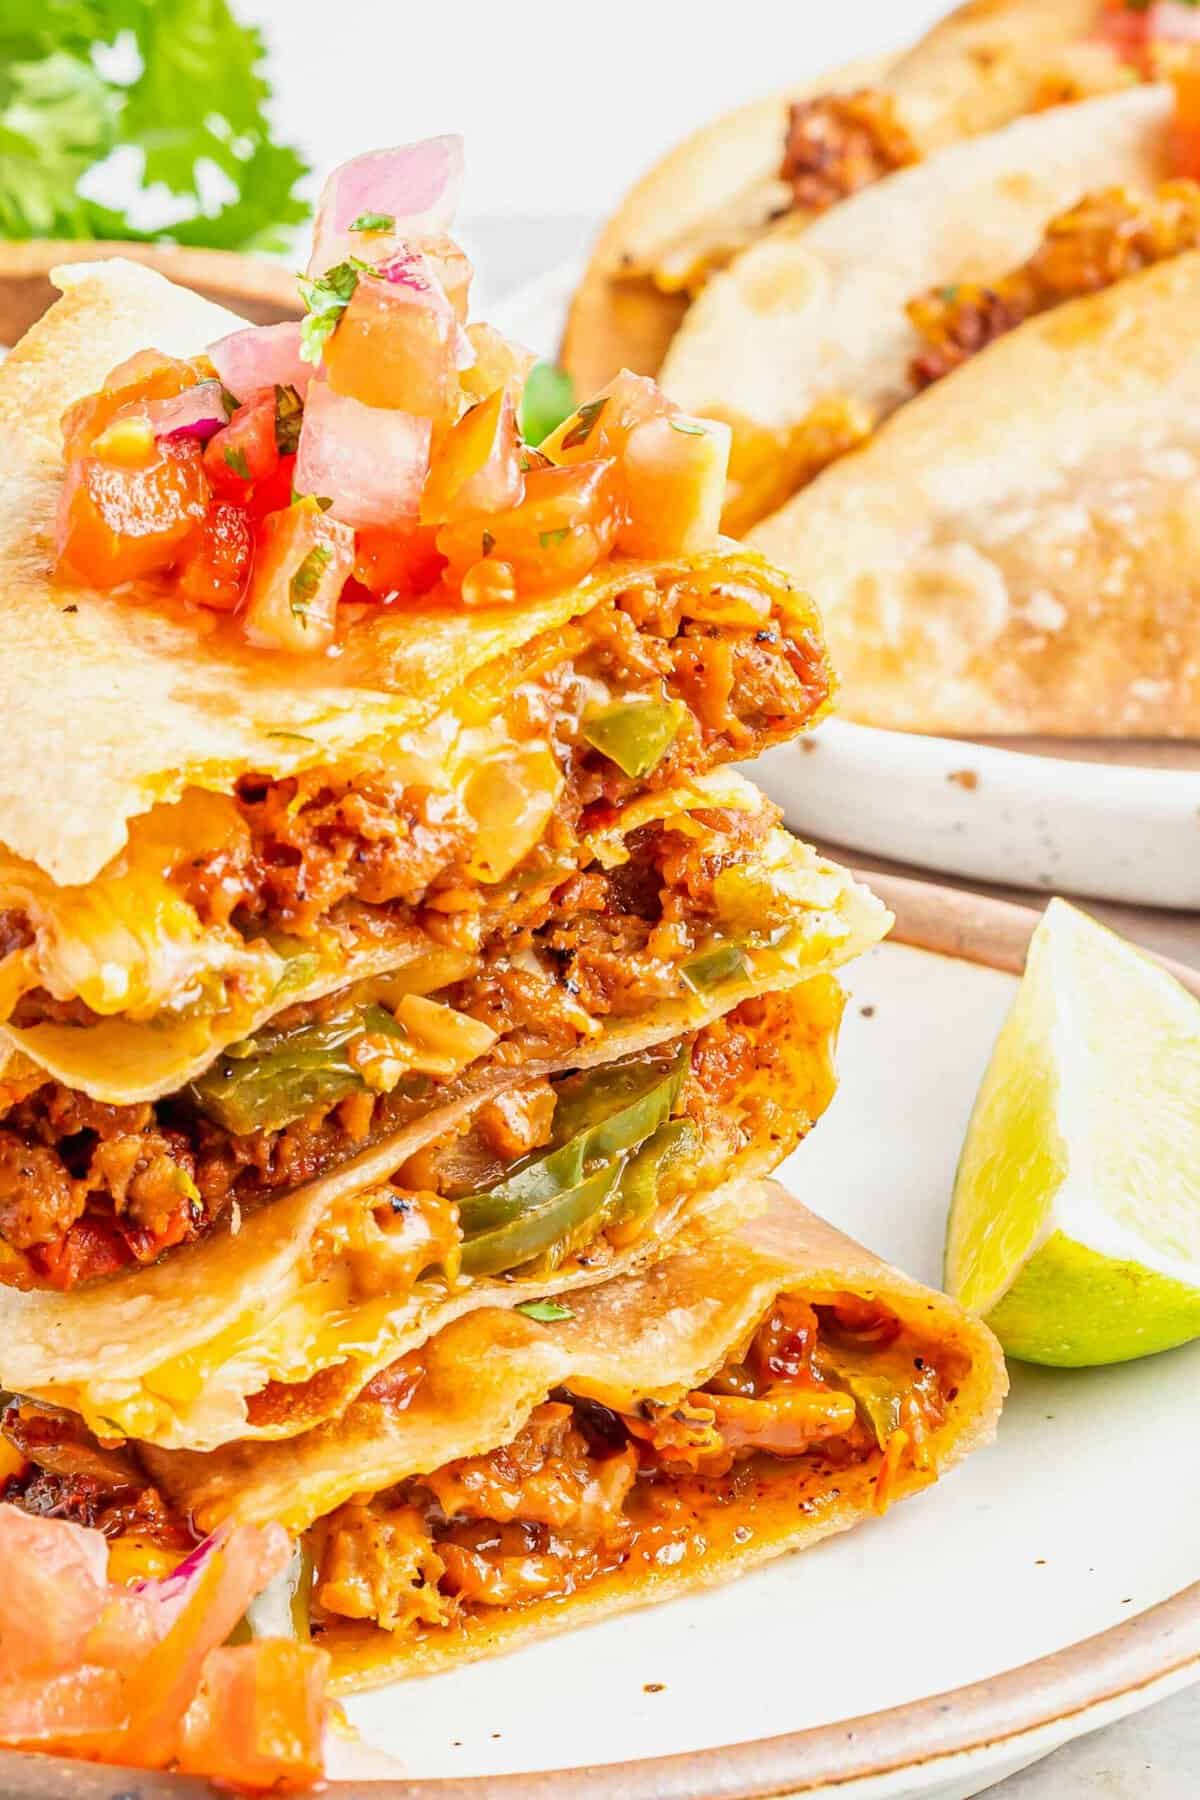 https://www.tablefortwoblog.com/wp-content/uploads/2021/09/sheetpan-beef-cheese-quesadillas-recipe-photo-tablefortwoblog-4-scaled.jpg